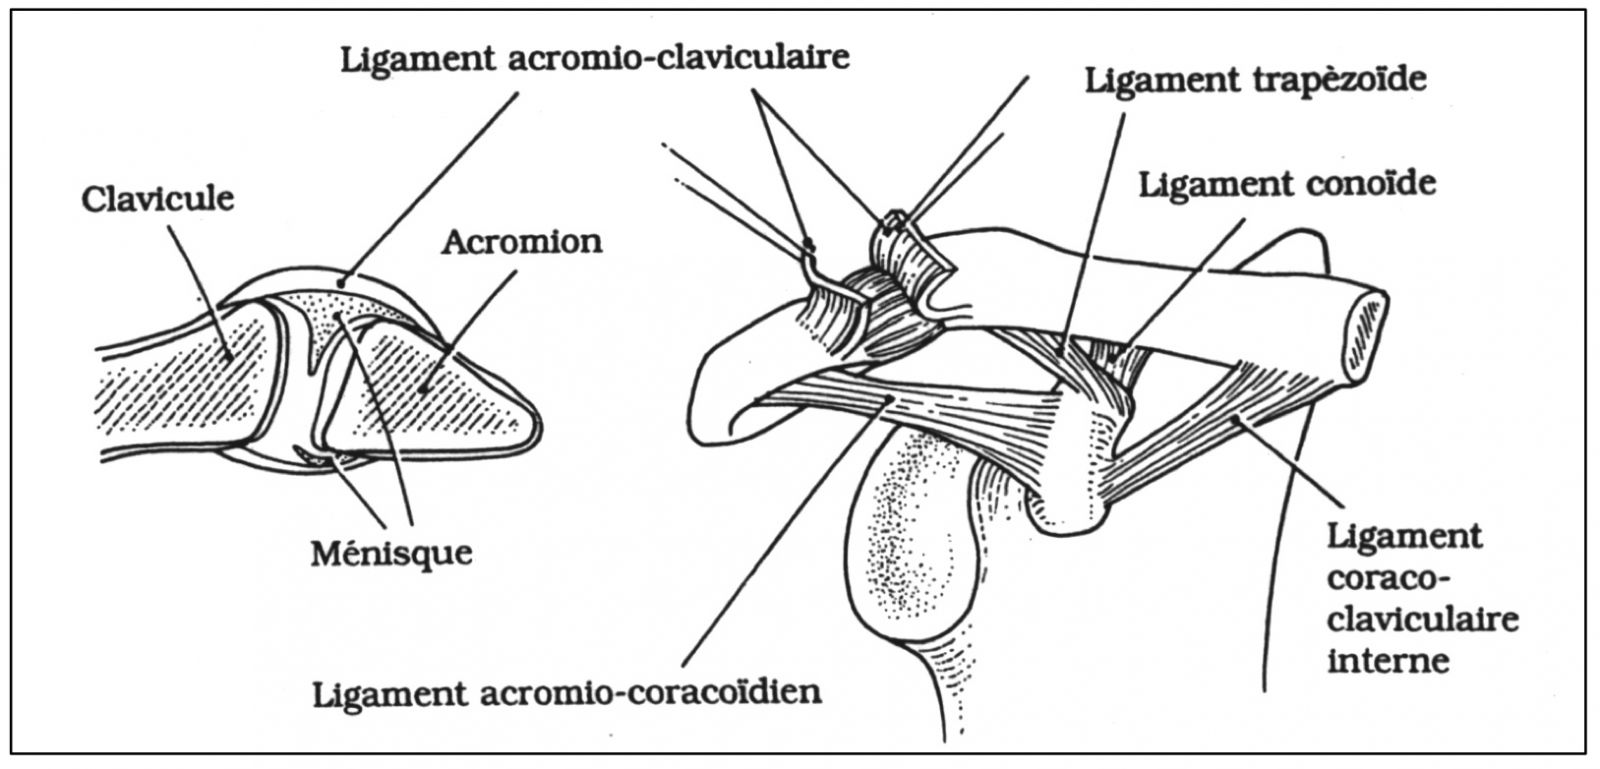 Disjonctions acromio-claviculaires